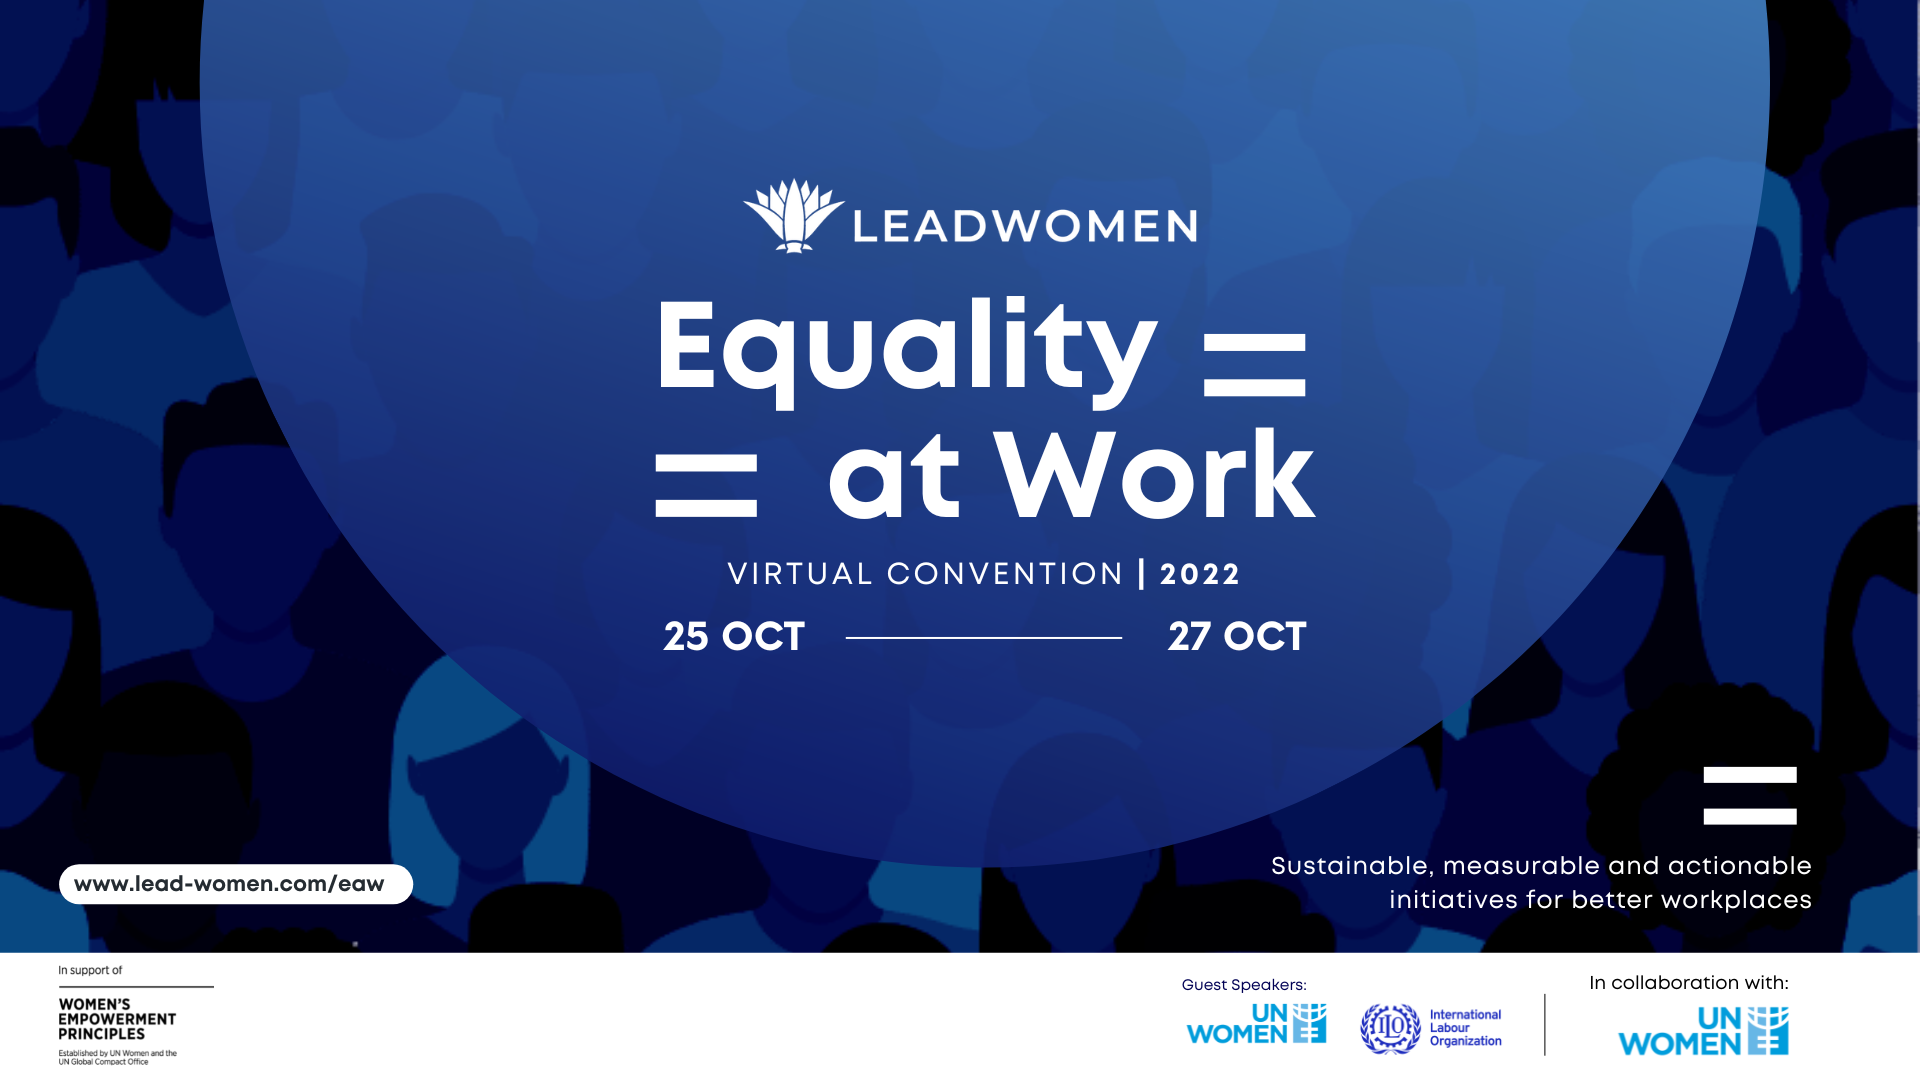 Rentwise is proud and excited to participate in Equality at Work Convention organized by LeadWomen